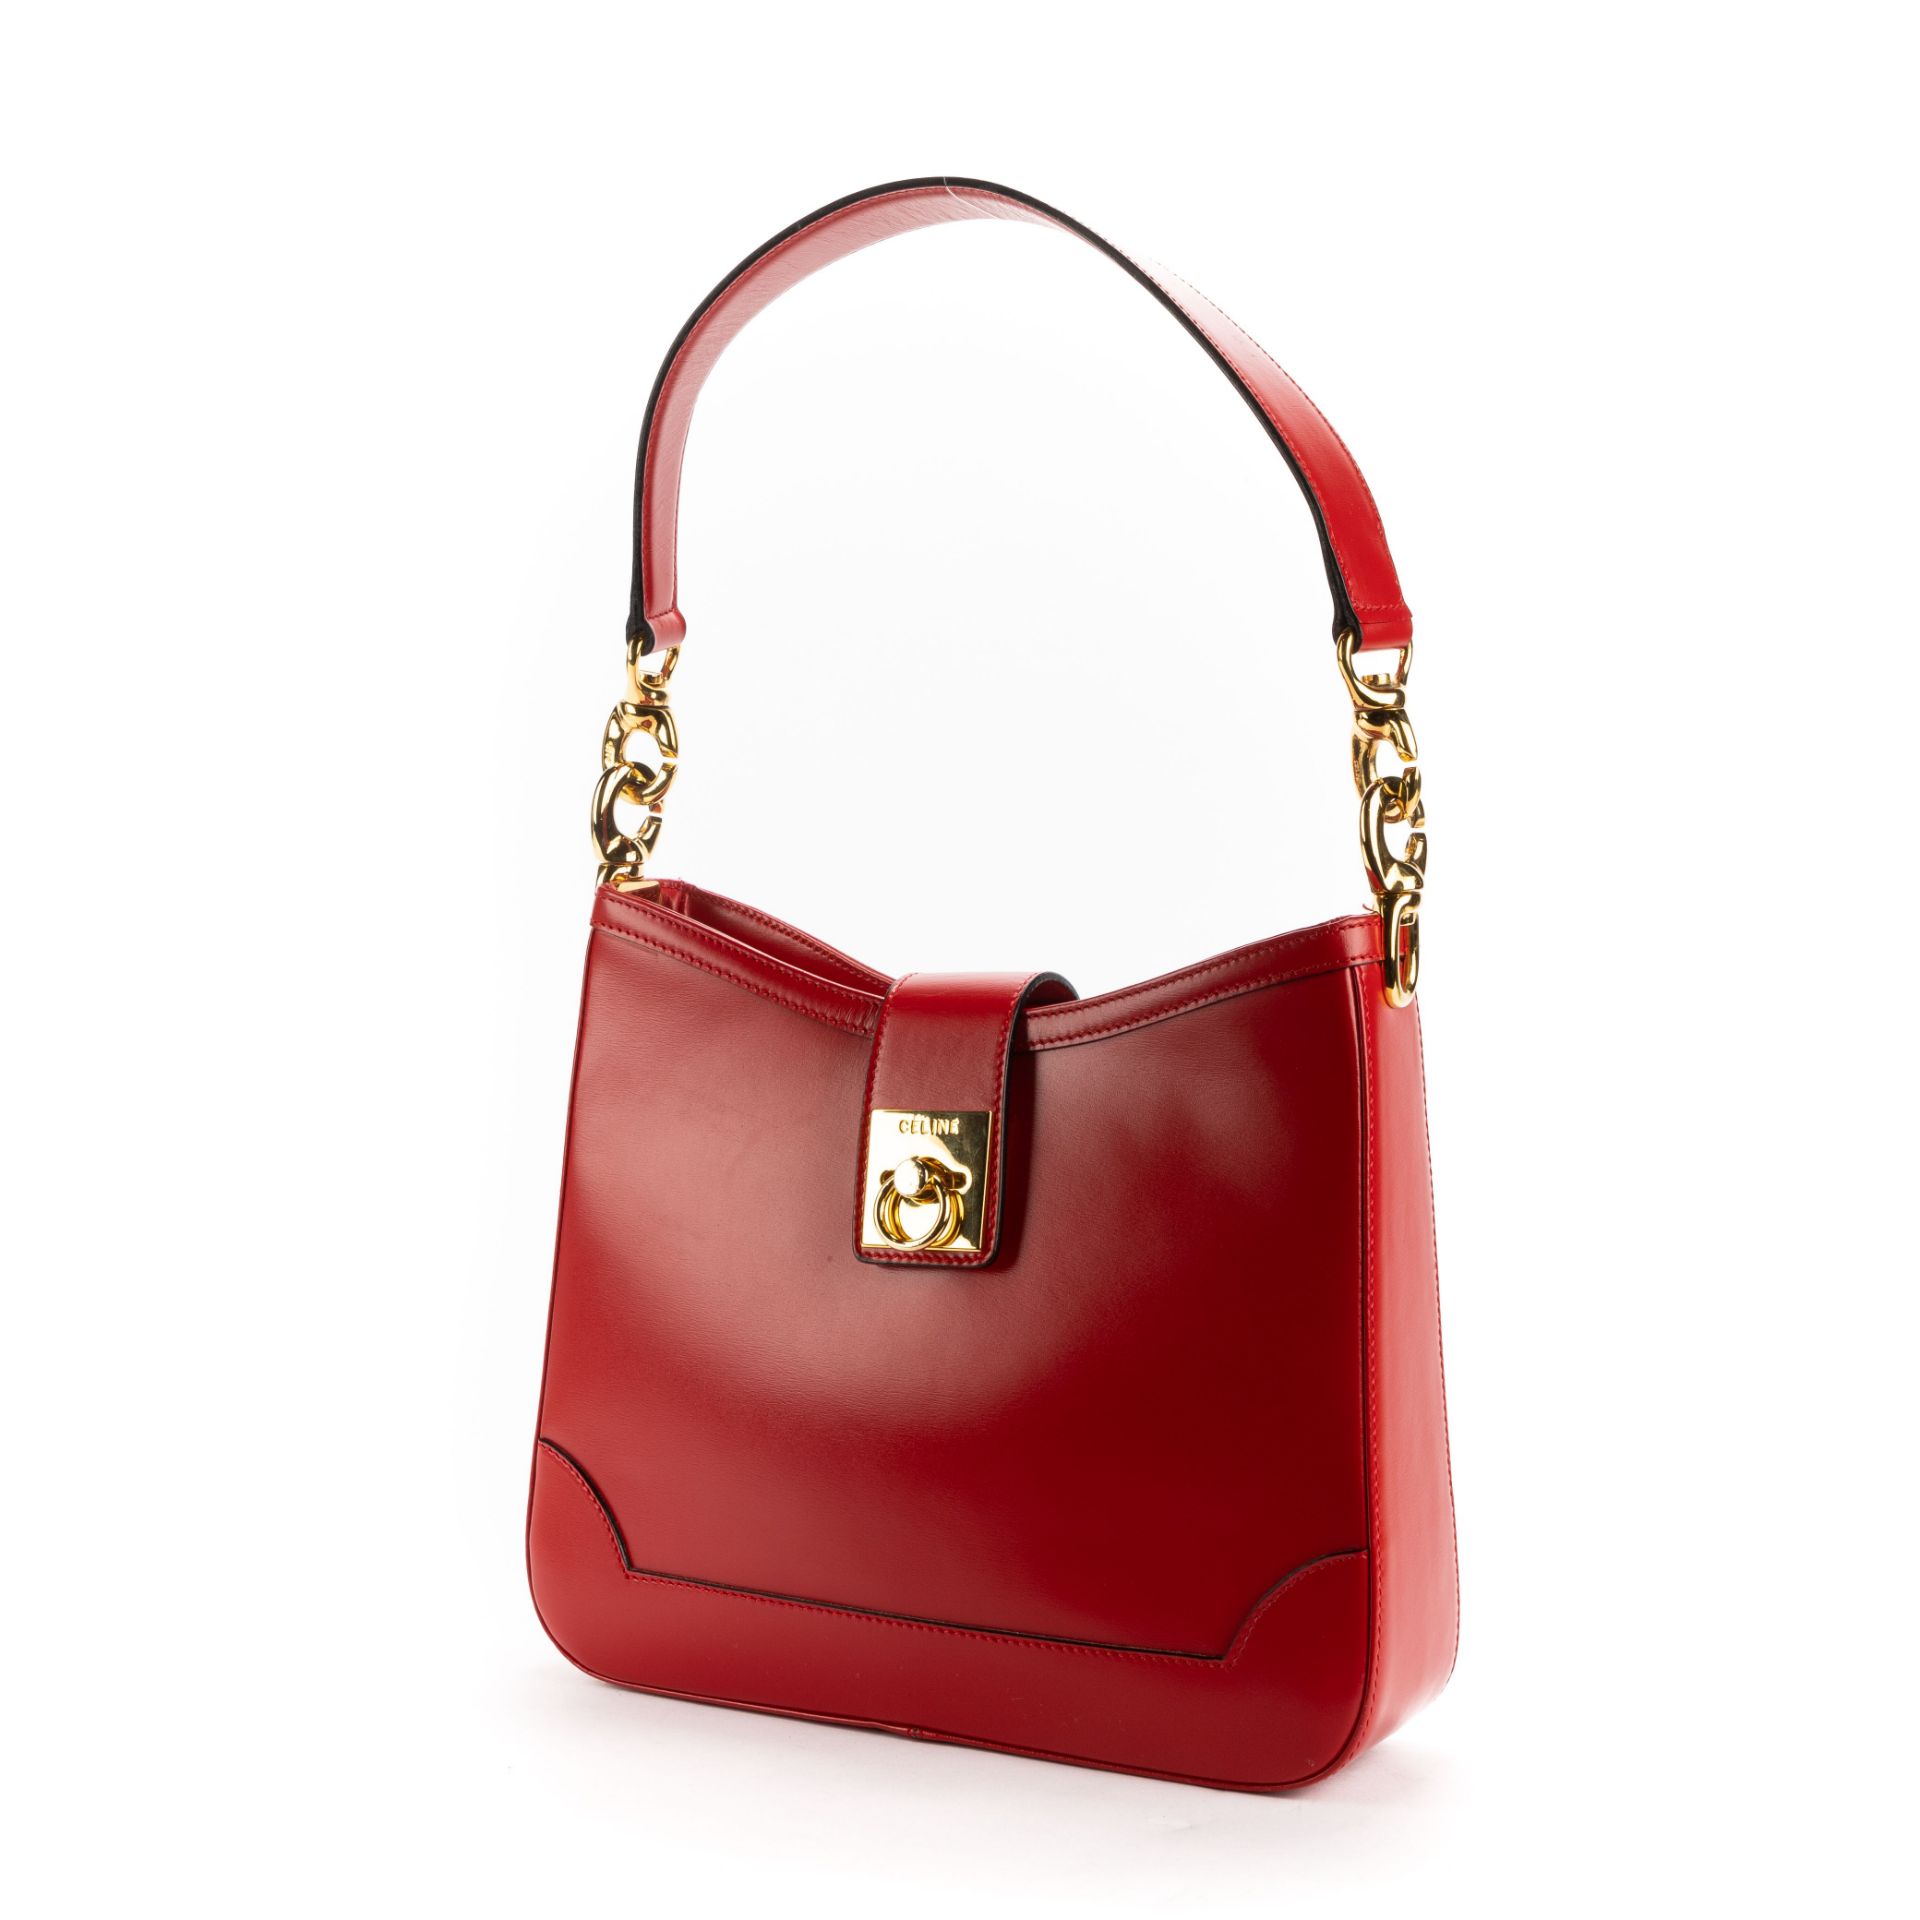 RRP £2600 Celine Single Flap Tote Shoulder Bag in Red - EAG3391 - Grade AA Please Contact Us